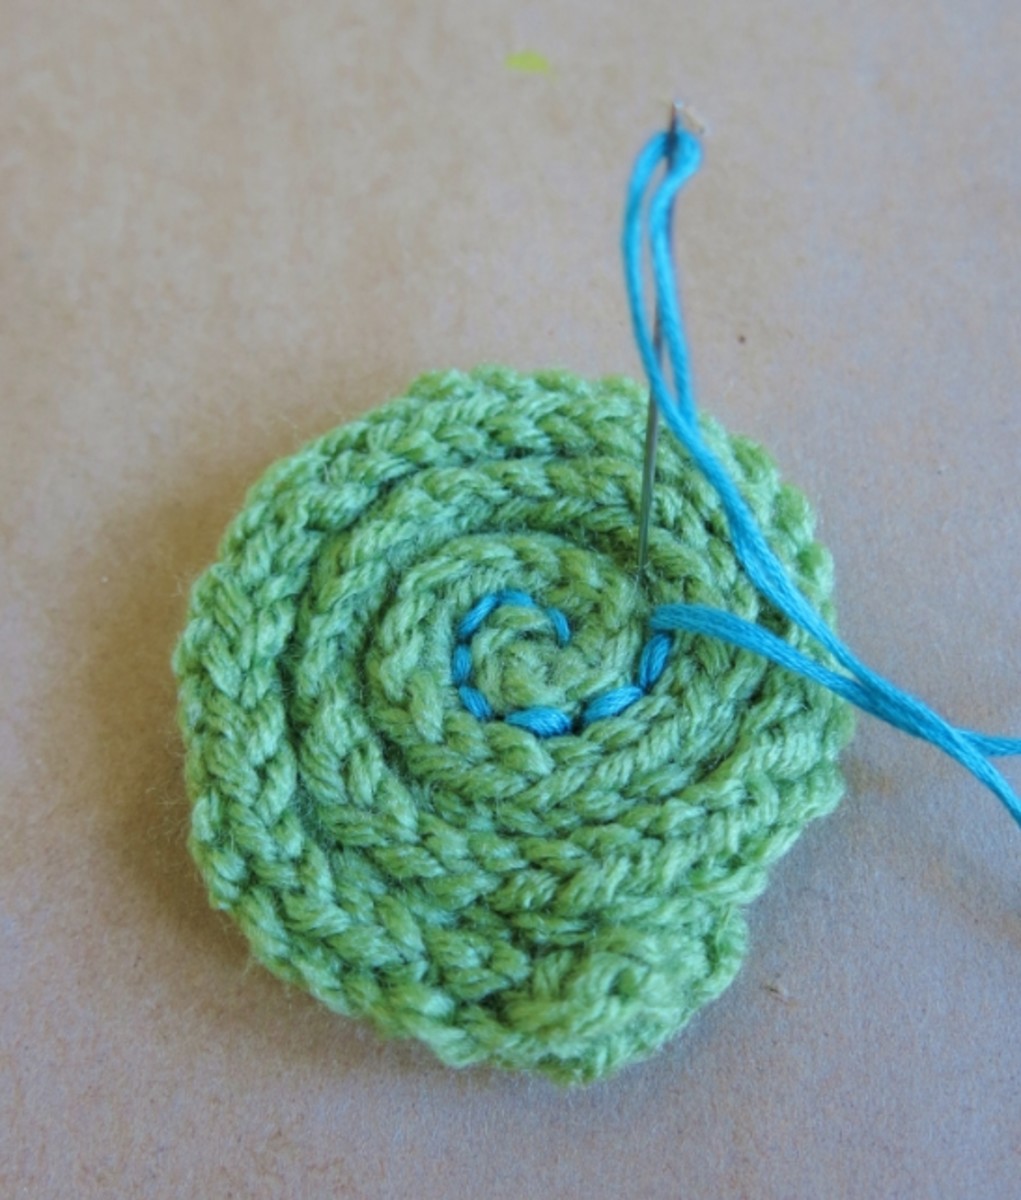 Use contrasting thread or yarn to add detail to your yarn ball bookmark.